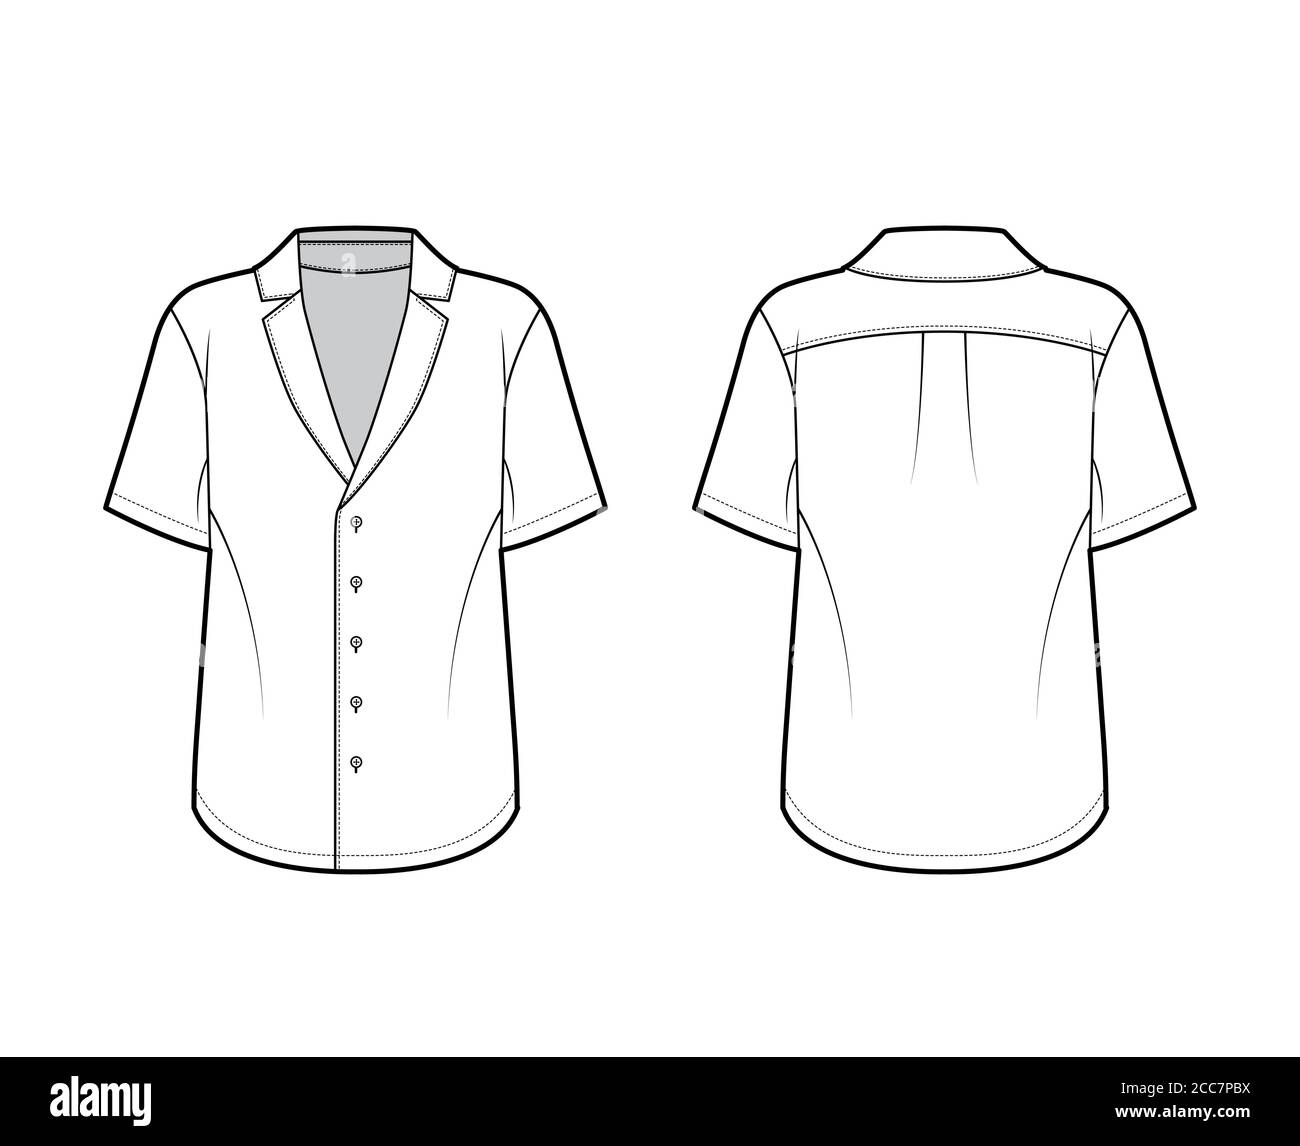 Pajama-style shirt technical fashion illustration with loose silhouette, pointed notch collar front button fastenings, short sleeves. Flat apparel template front back white color. Women men unisex top Stock Vector